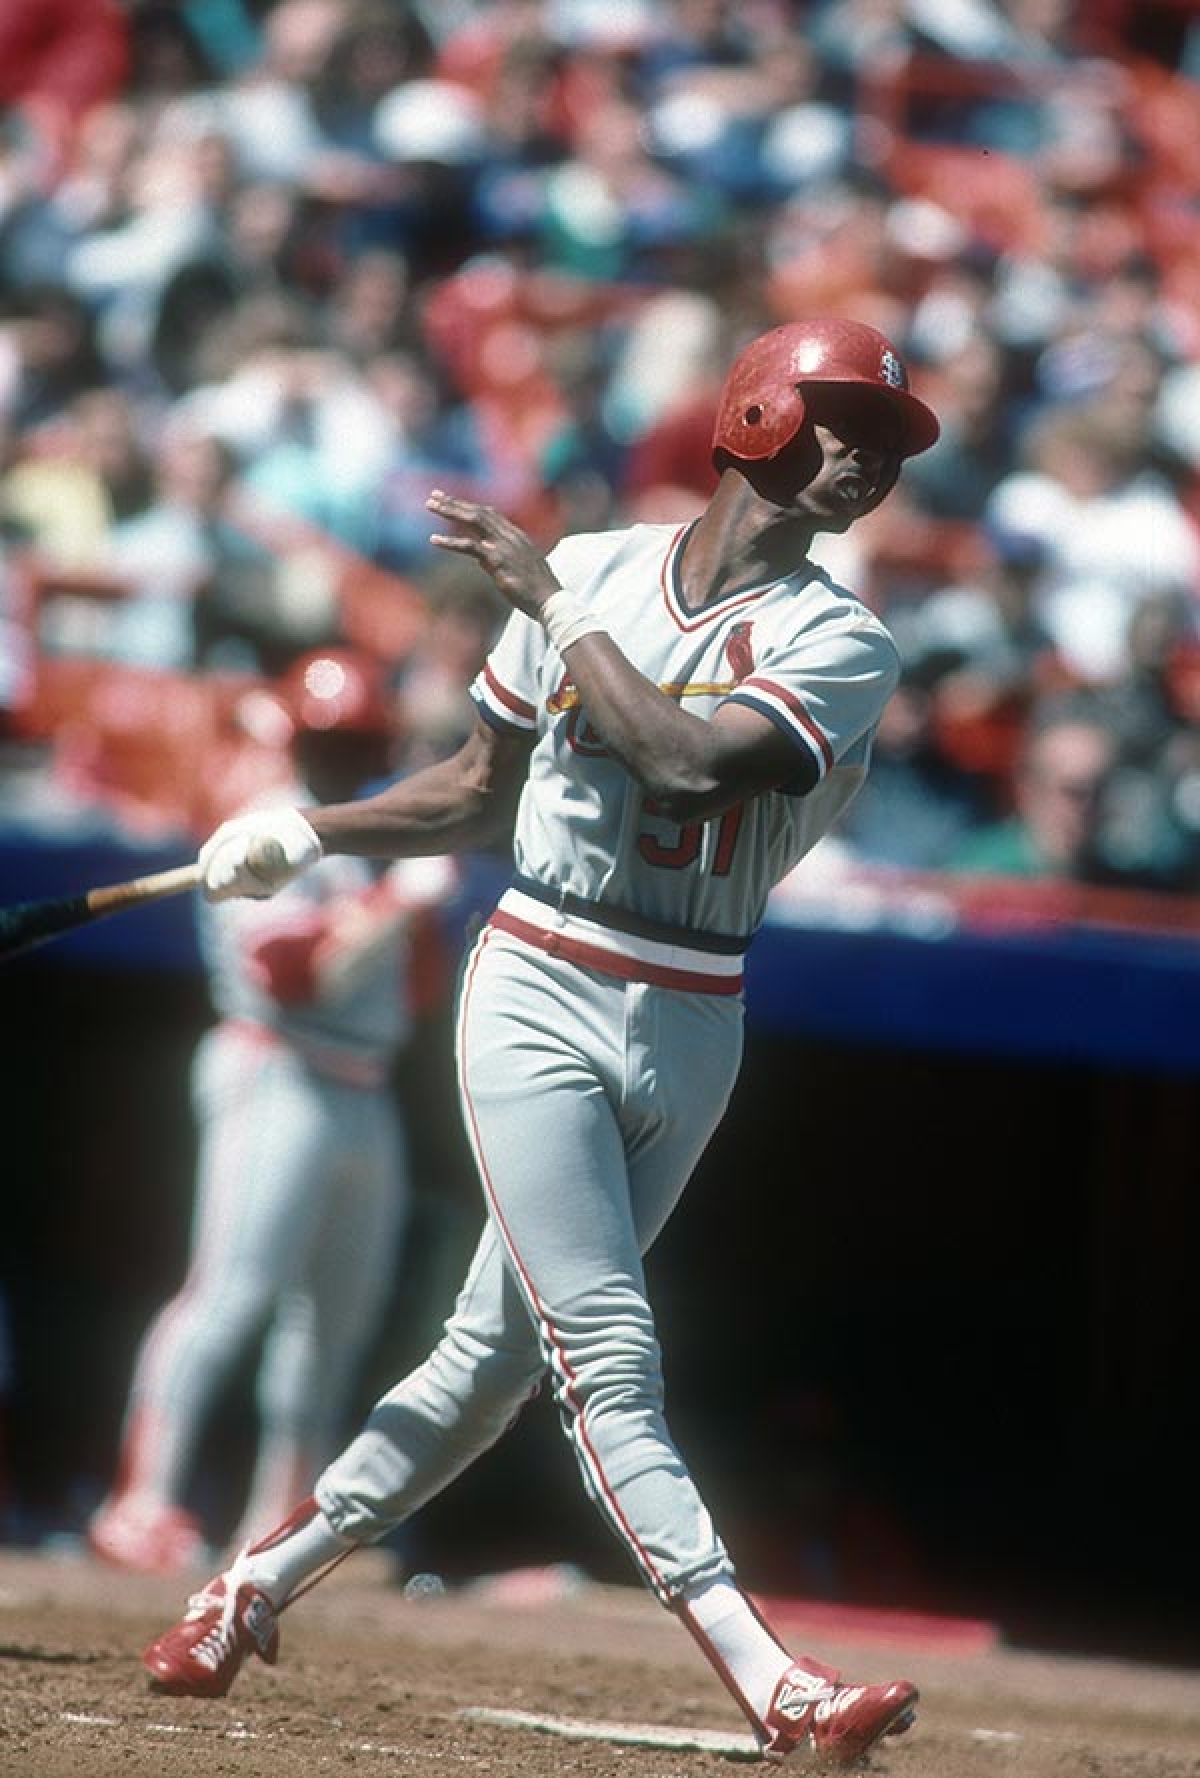 Not in Hall of Fame - 27. Willie McGee